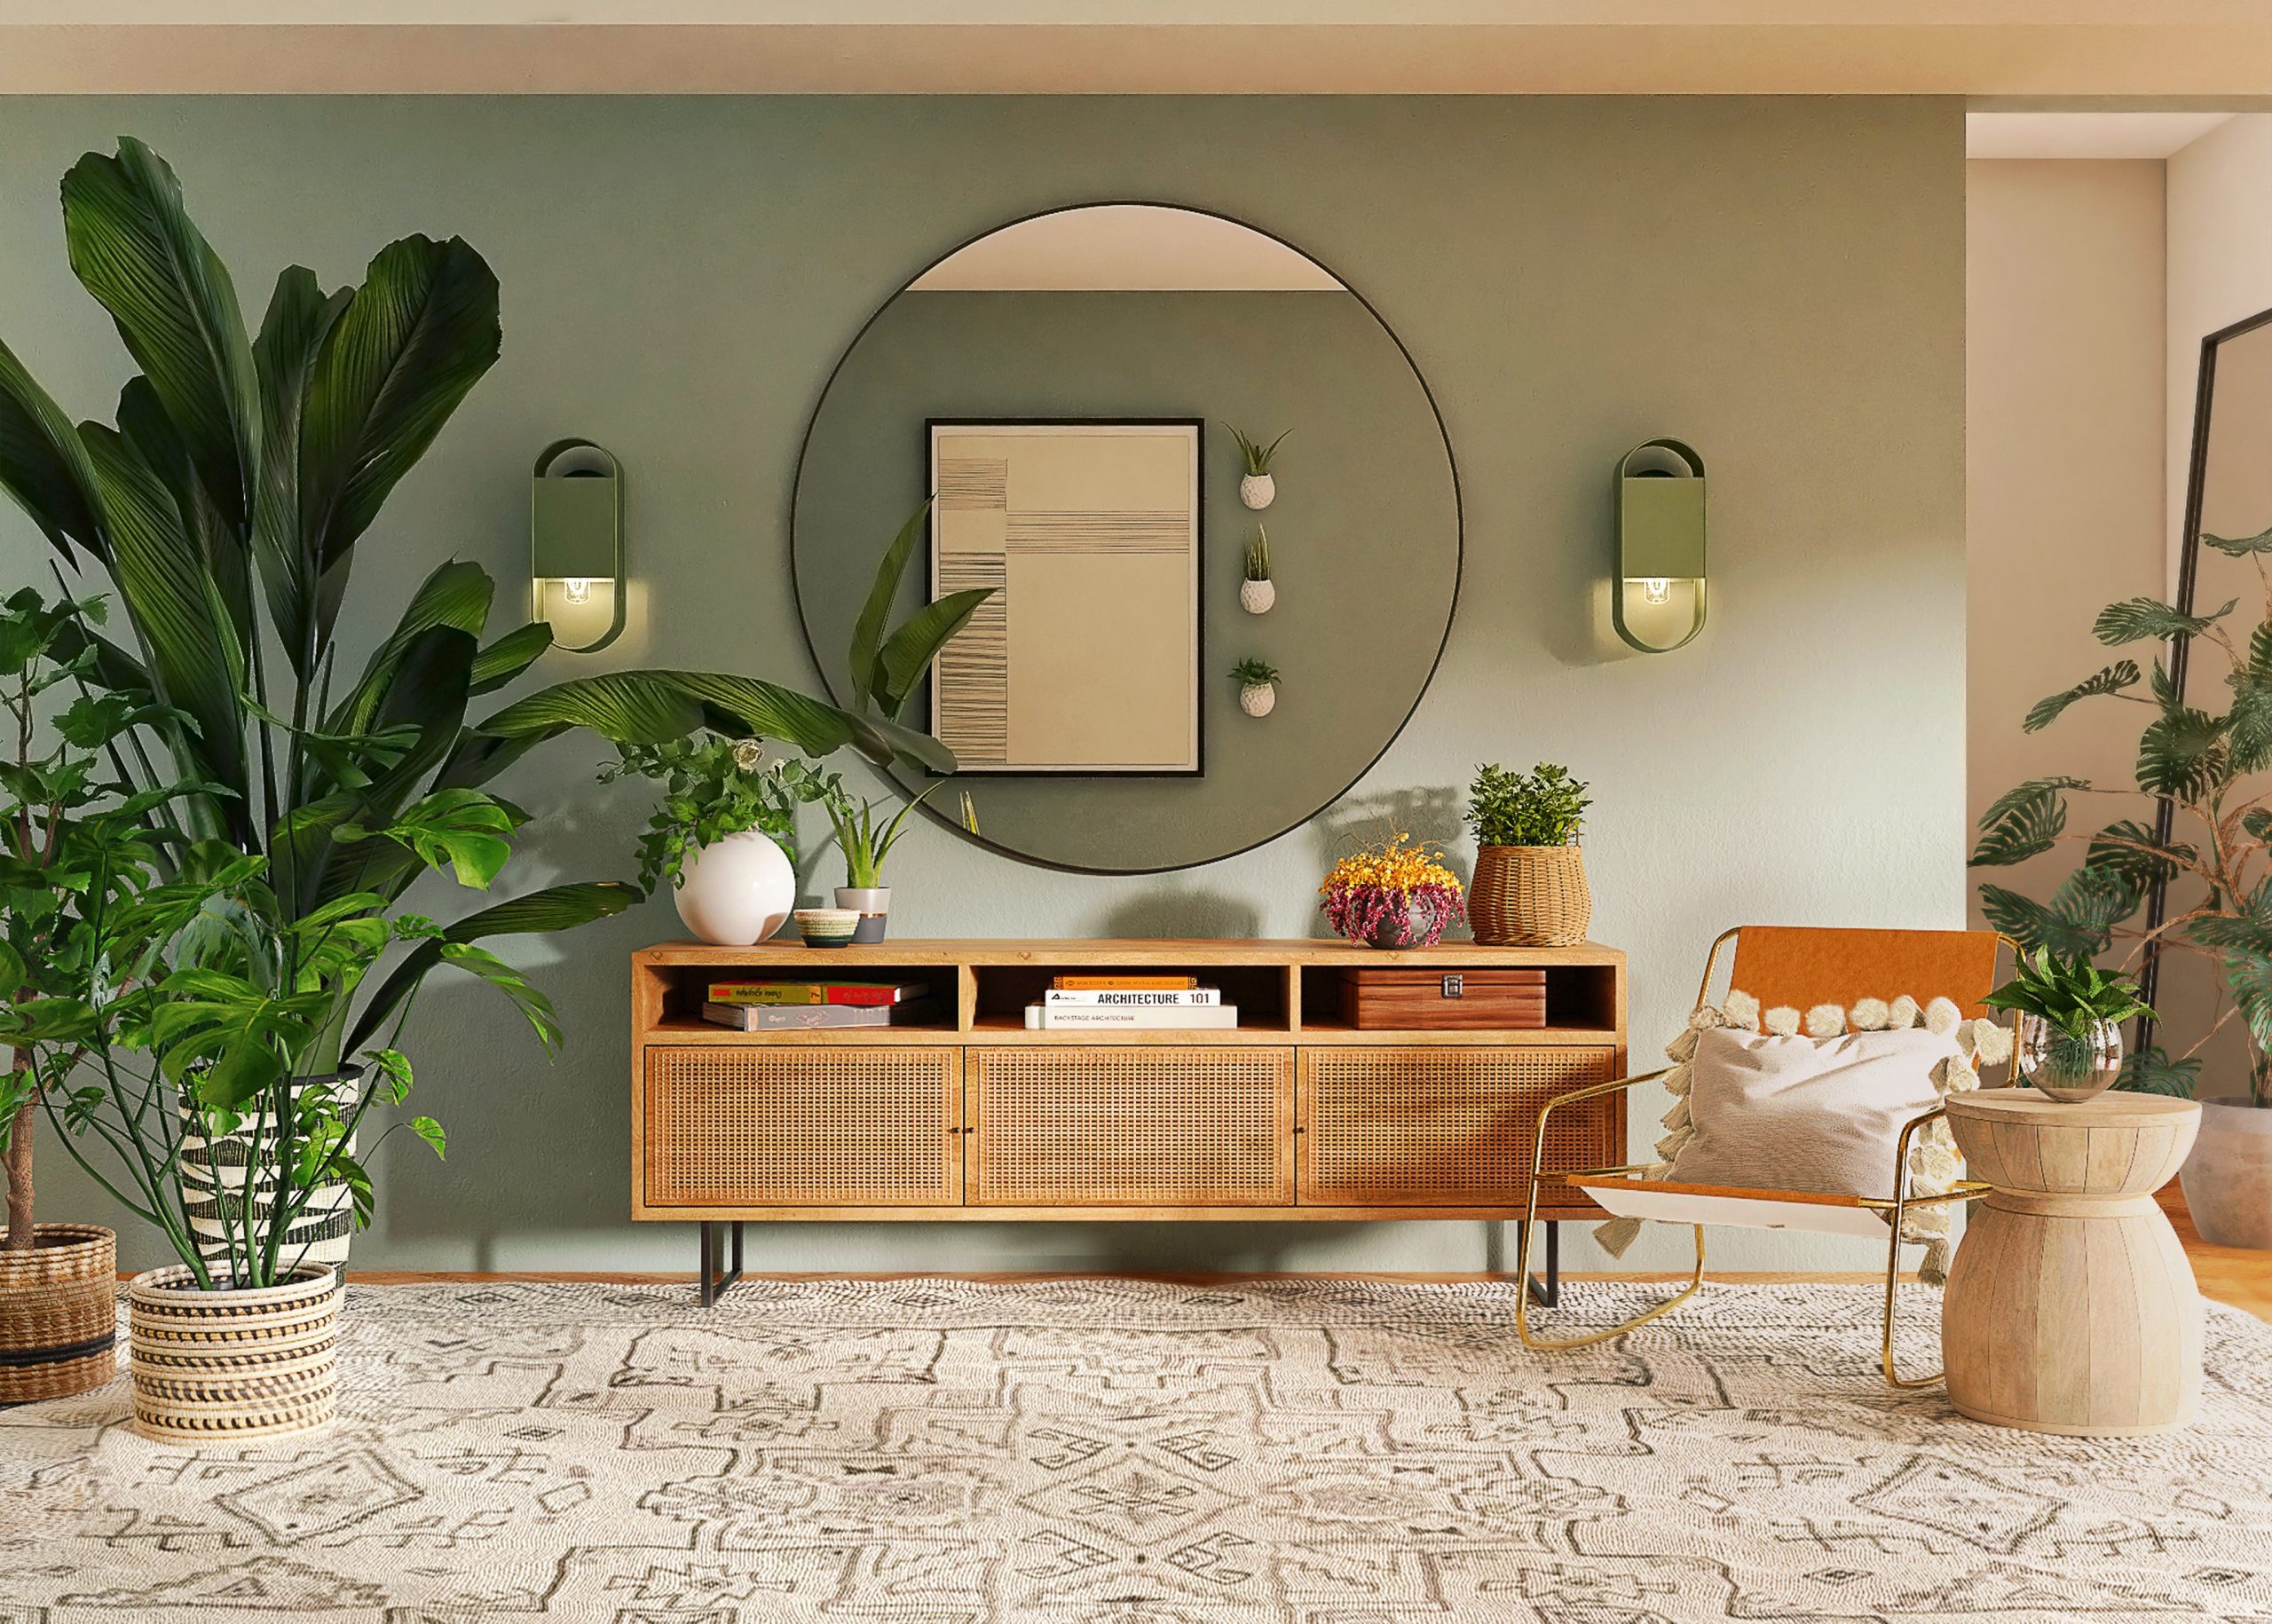 An airy living room with pale green walls, a large circular mirror, and plants of all sizes on the surfaces and walls.